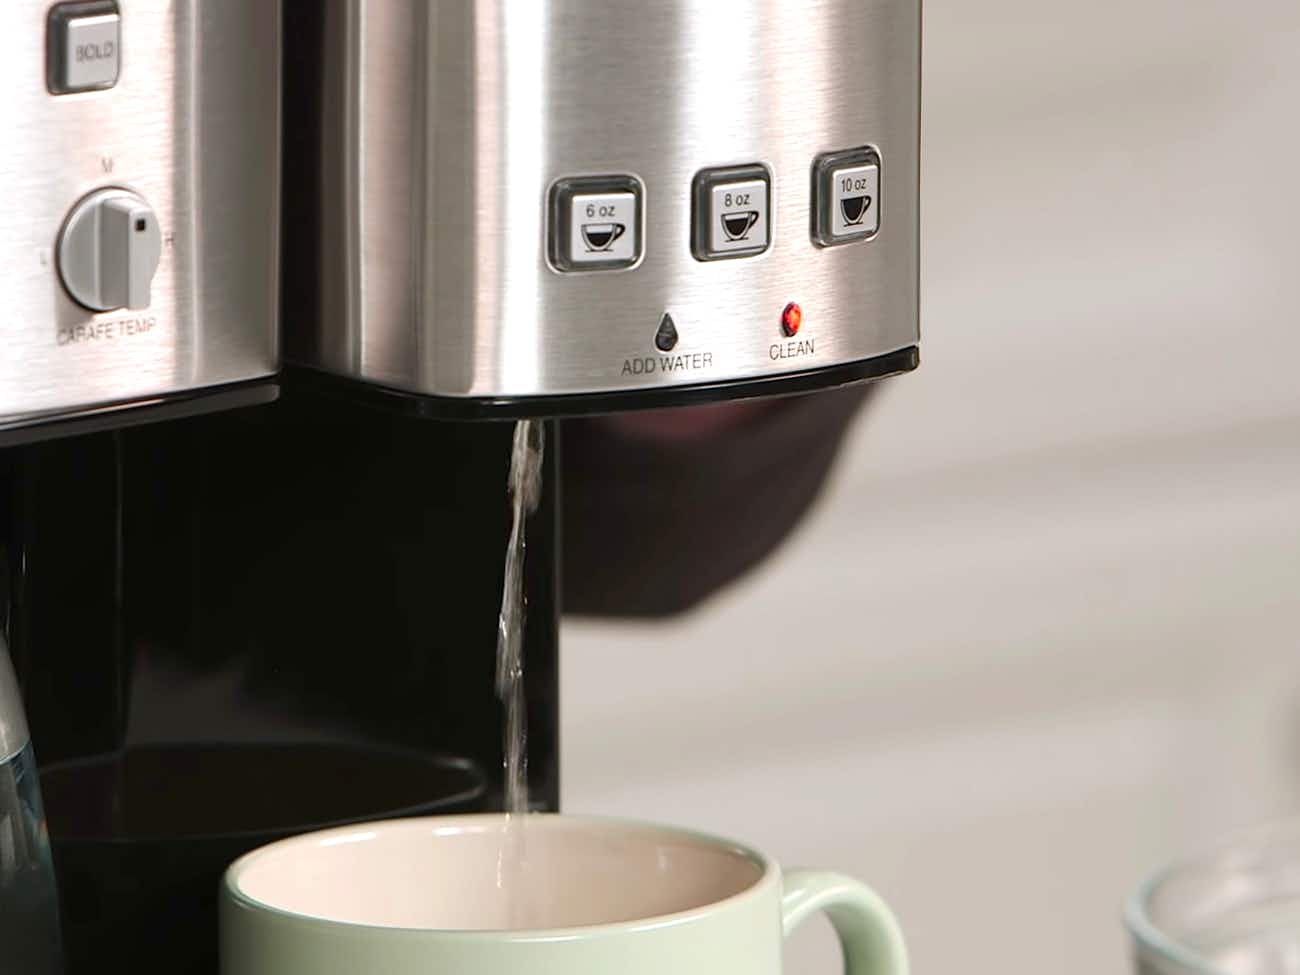 How to Clean Cuisinart Dual Coffee Maker? 8 Easy Steps